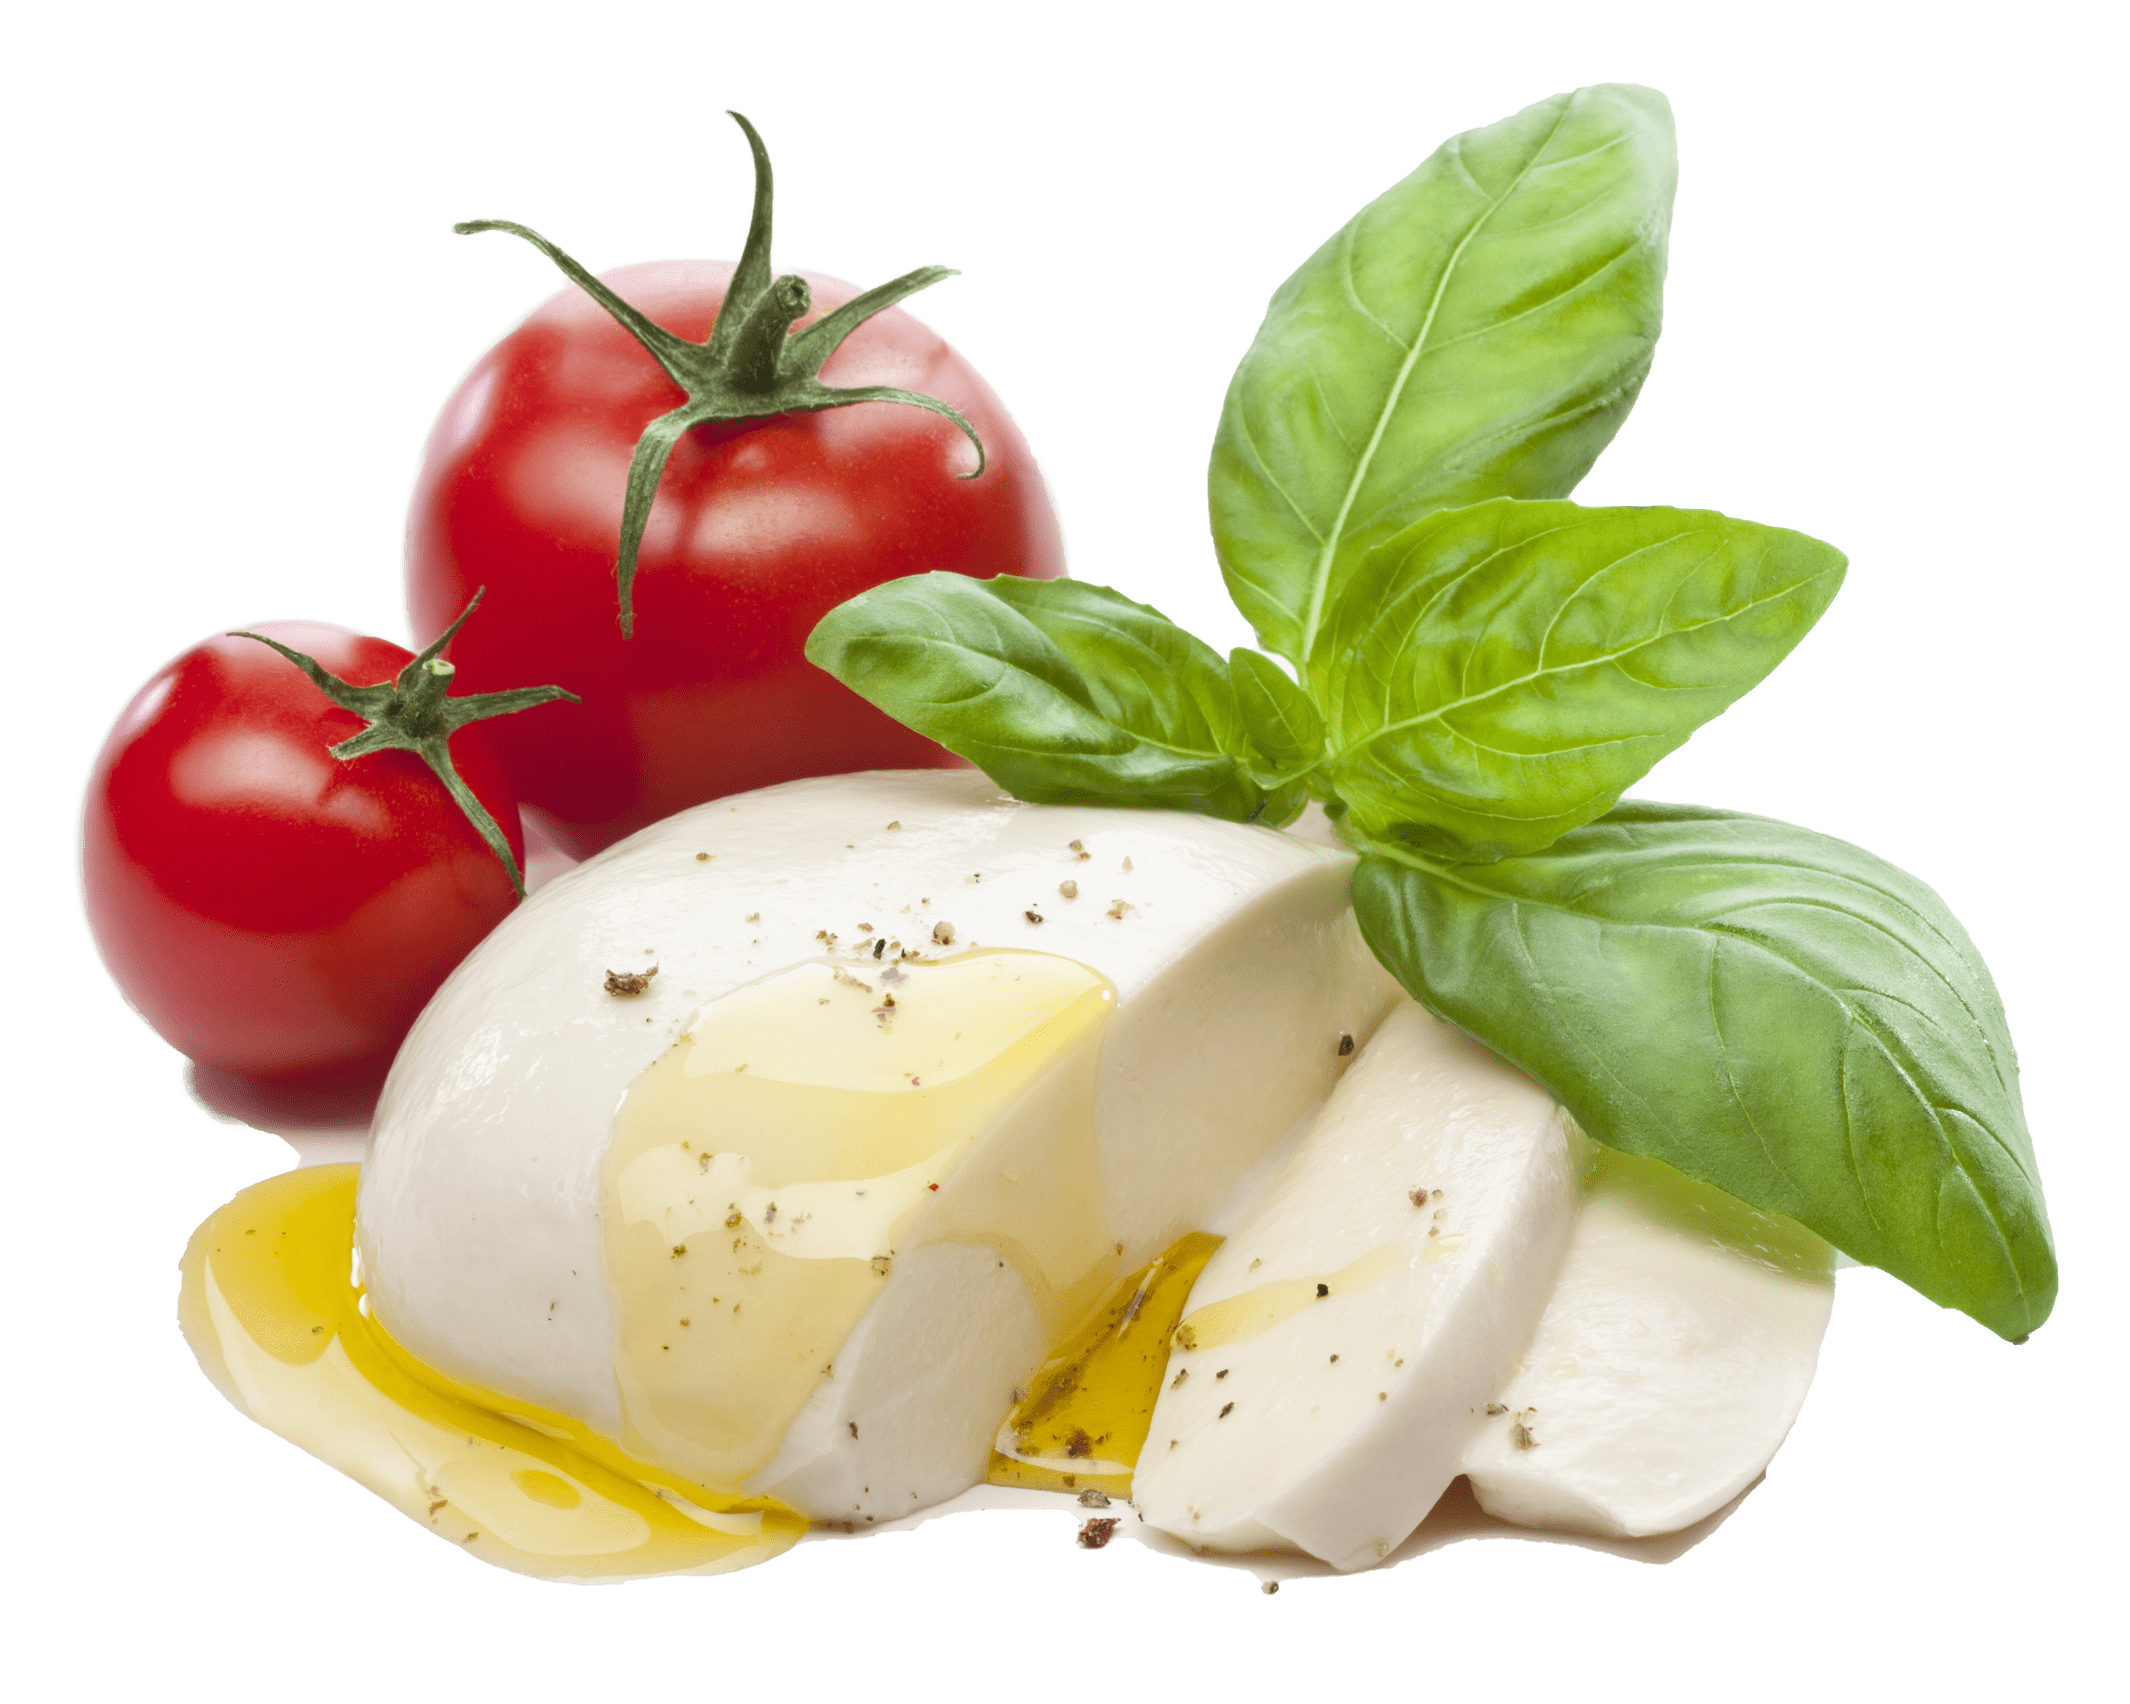 Fresh mozzarella cheese with olive oil, pepper, tomatoes and basil leaves